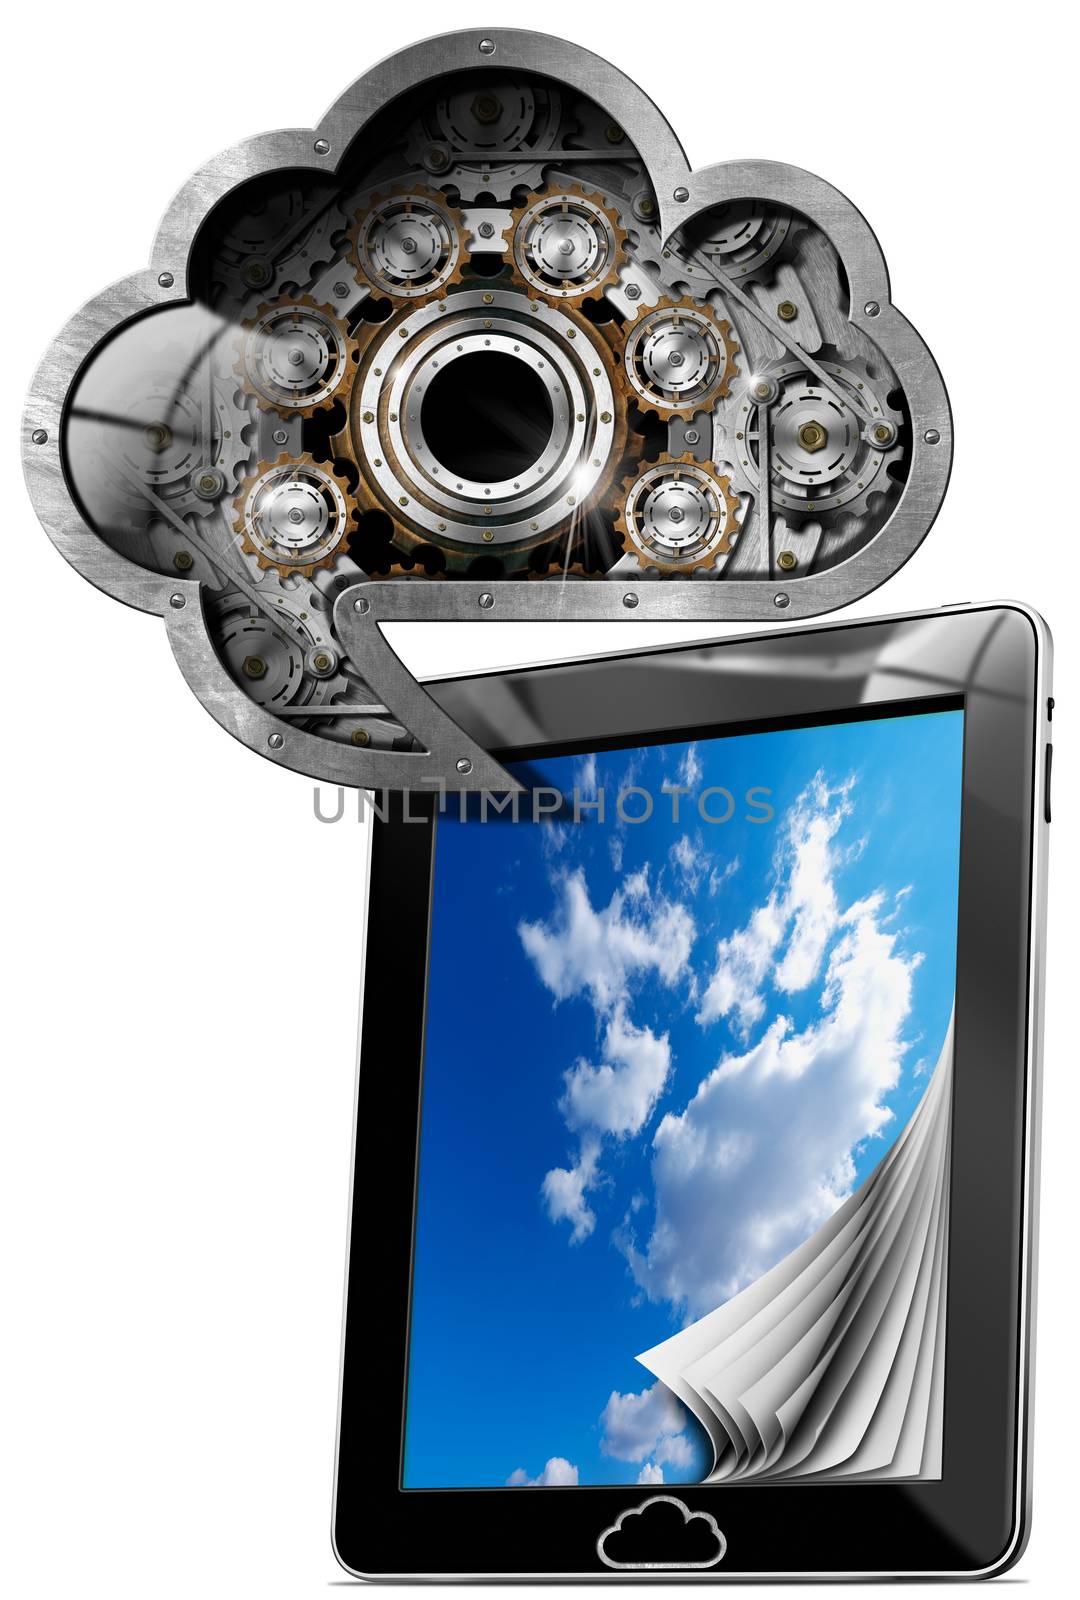 Tablet Pc With Cloud Computing Symbol by catalby